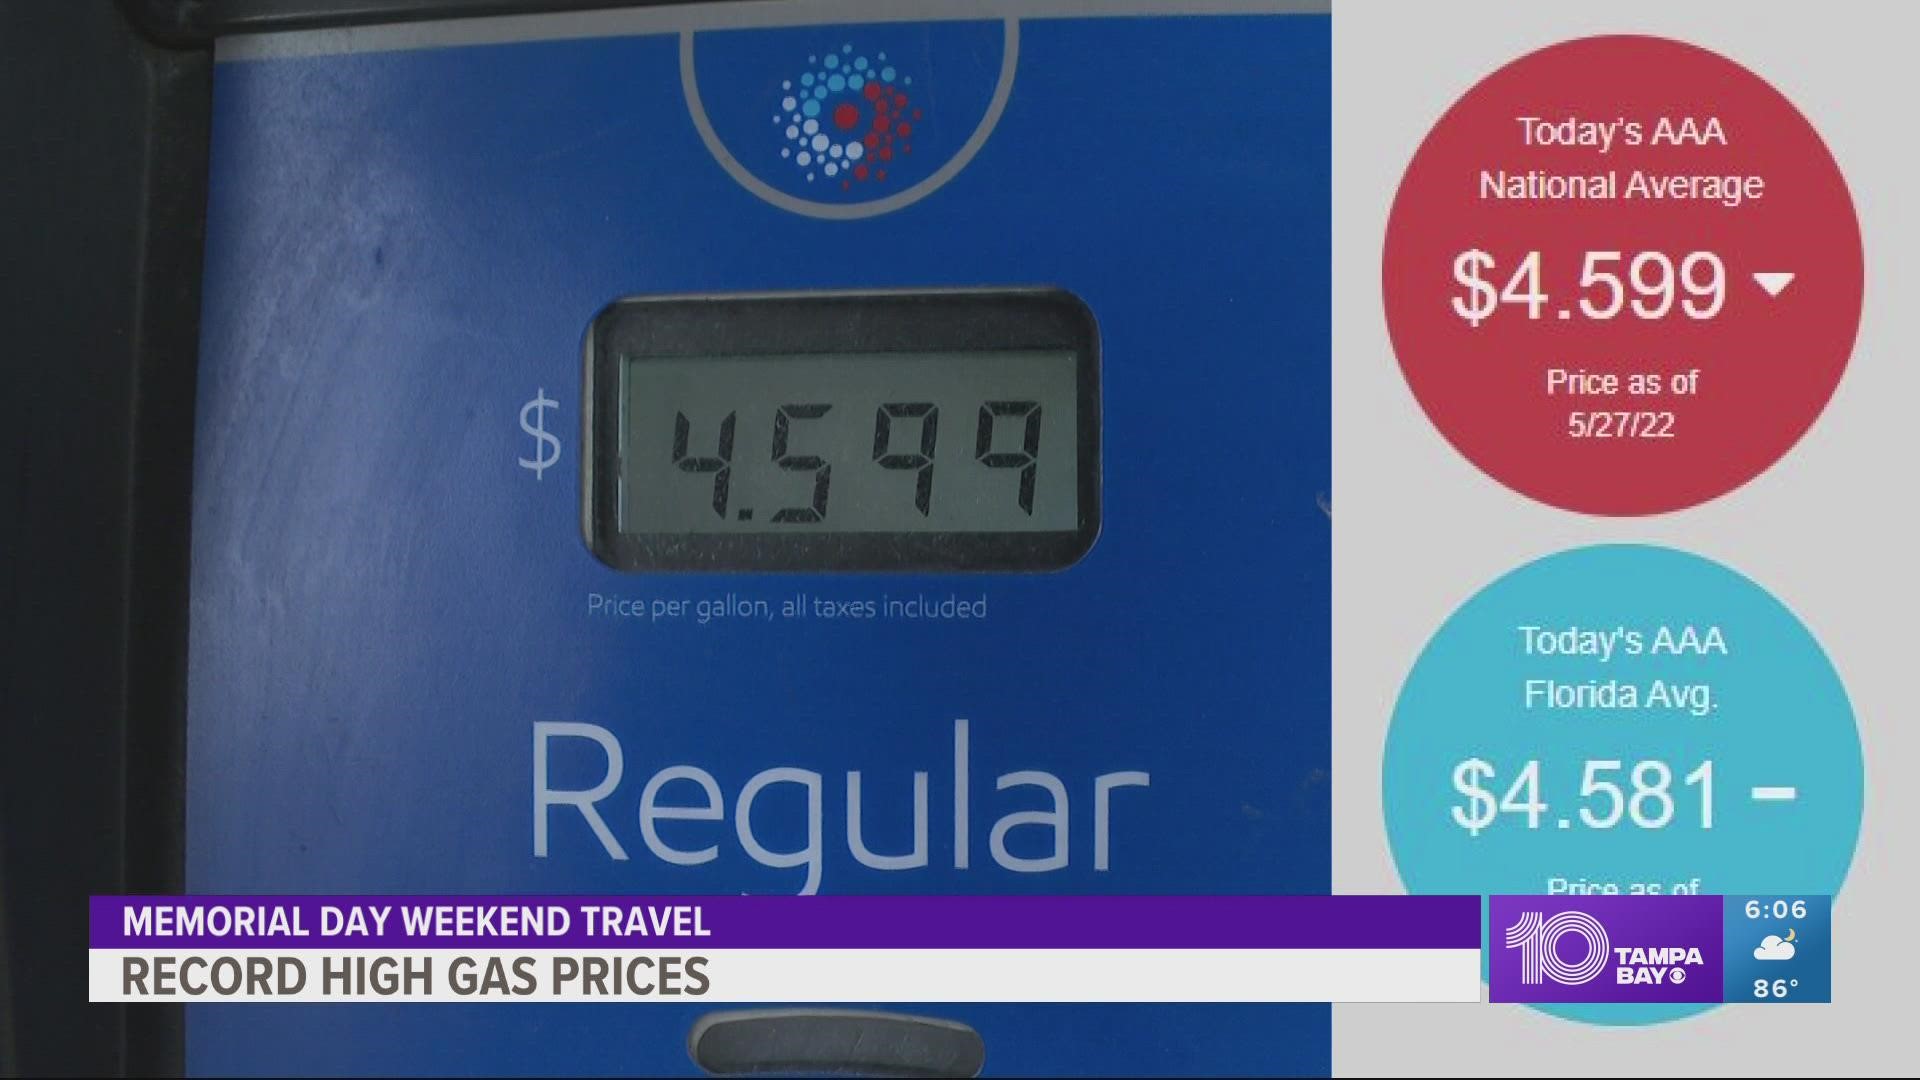 Florida recorded its highest ever average gas price on Thursday at $4.58 a gallon.